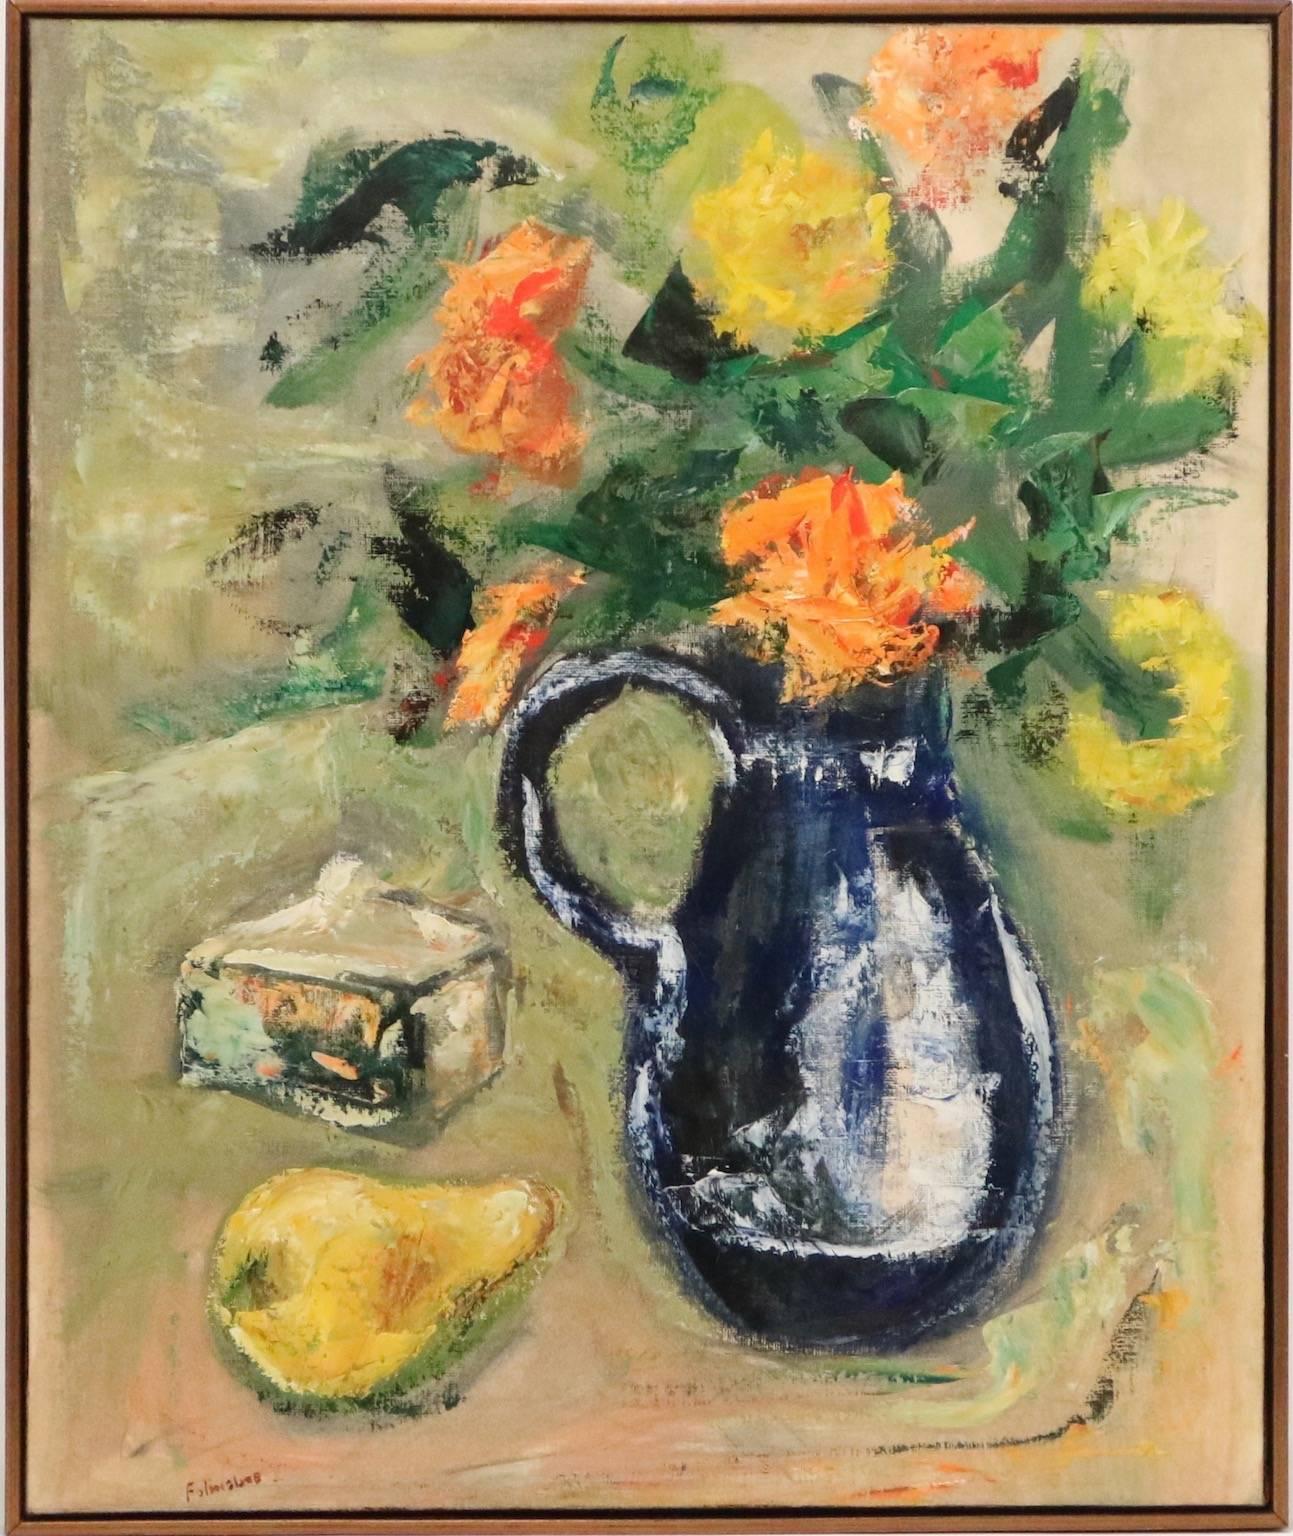 A signed expressionist still life by John F. Folinsbee (American, 1892-1972), obtained from a private collection, rendered in oil on paper, laid on canvas, depicting a floral arrangement in a blue pitcher, including a nearby pear and small box.